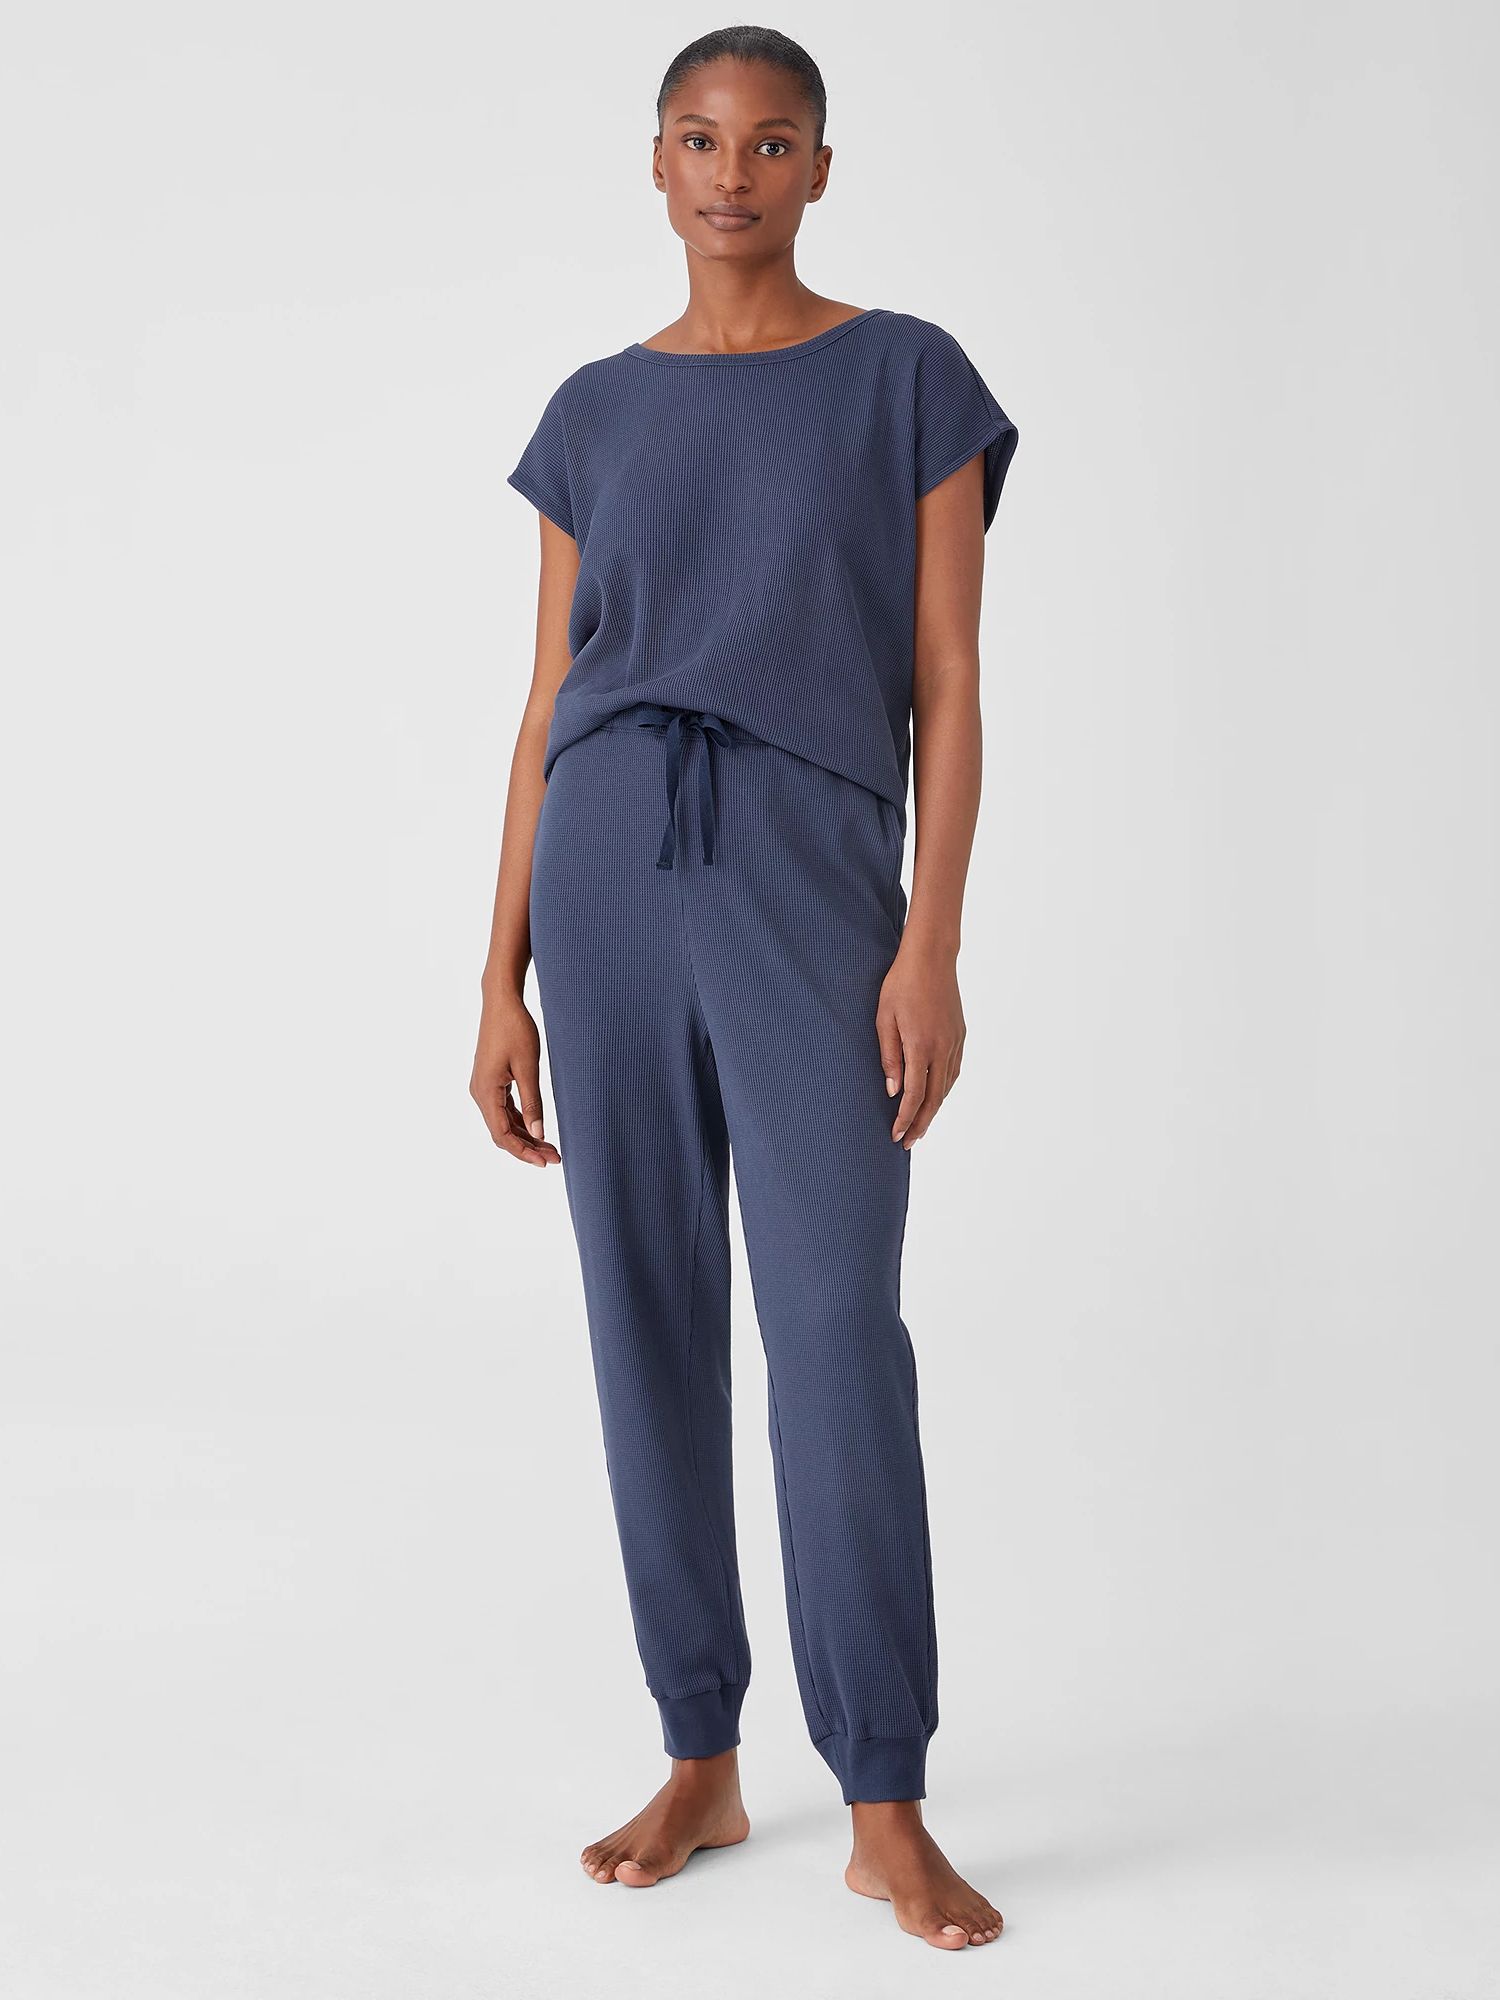 Cozy Organic Cotton Thermal Jogger Pant | Eileen Fisher